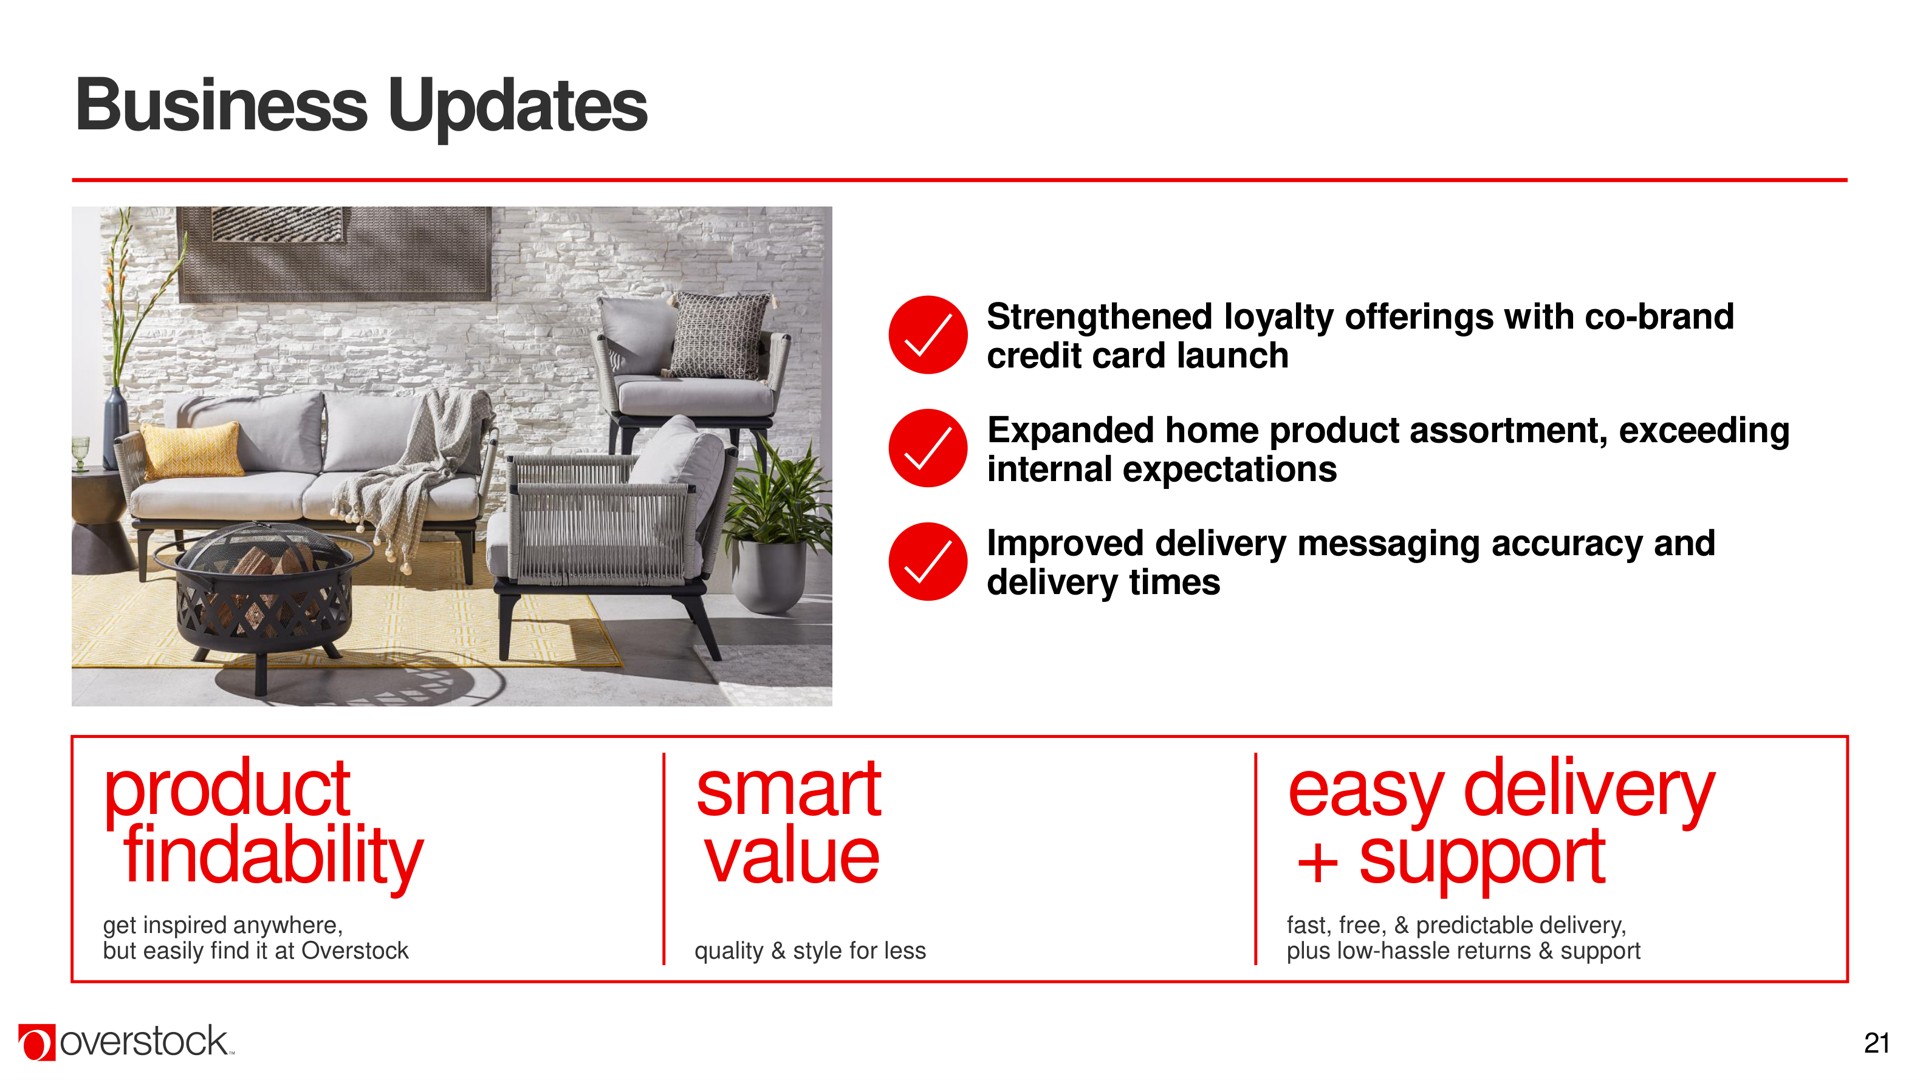 business updates product findability smart value easy delivery support | Overstock